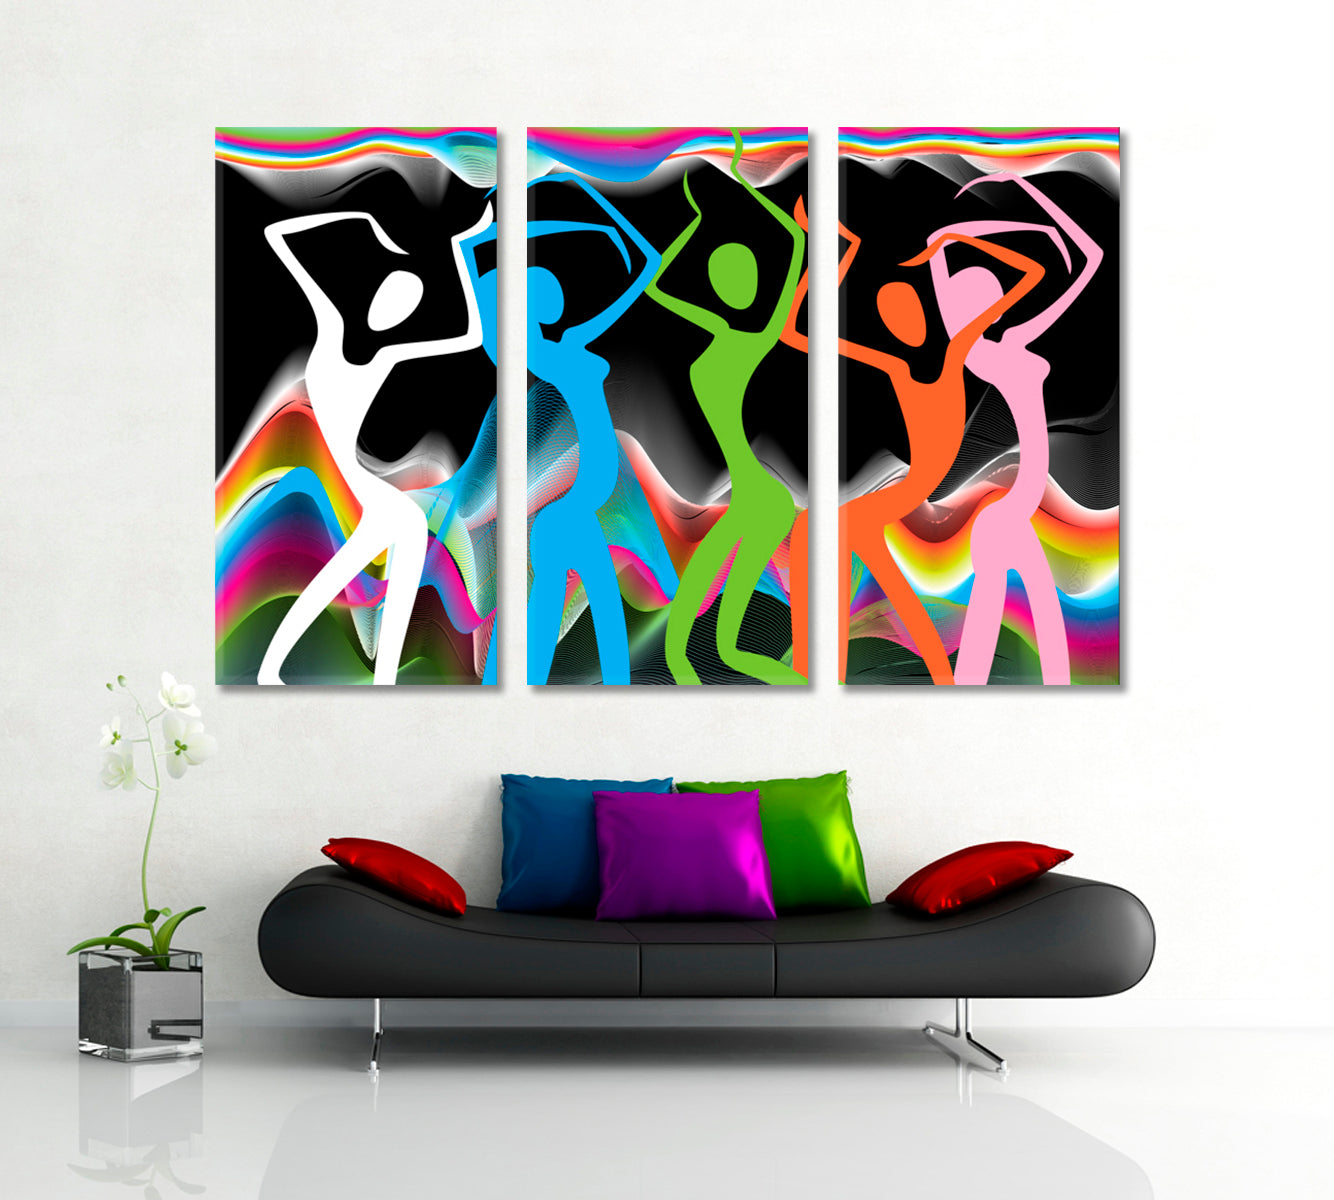 SPORT AND FITNESS Colorful Stylized Silhouettes Dancing Girls Motivation Sport Poster Print Decor Artesty 3 panels 36" x 24" 